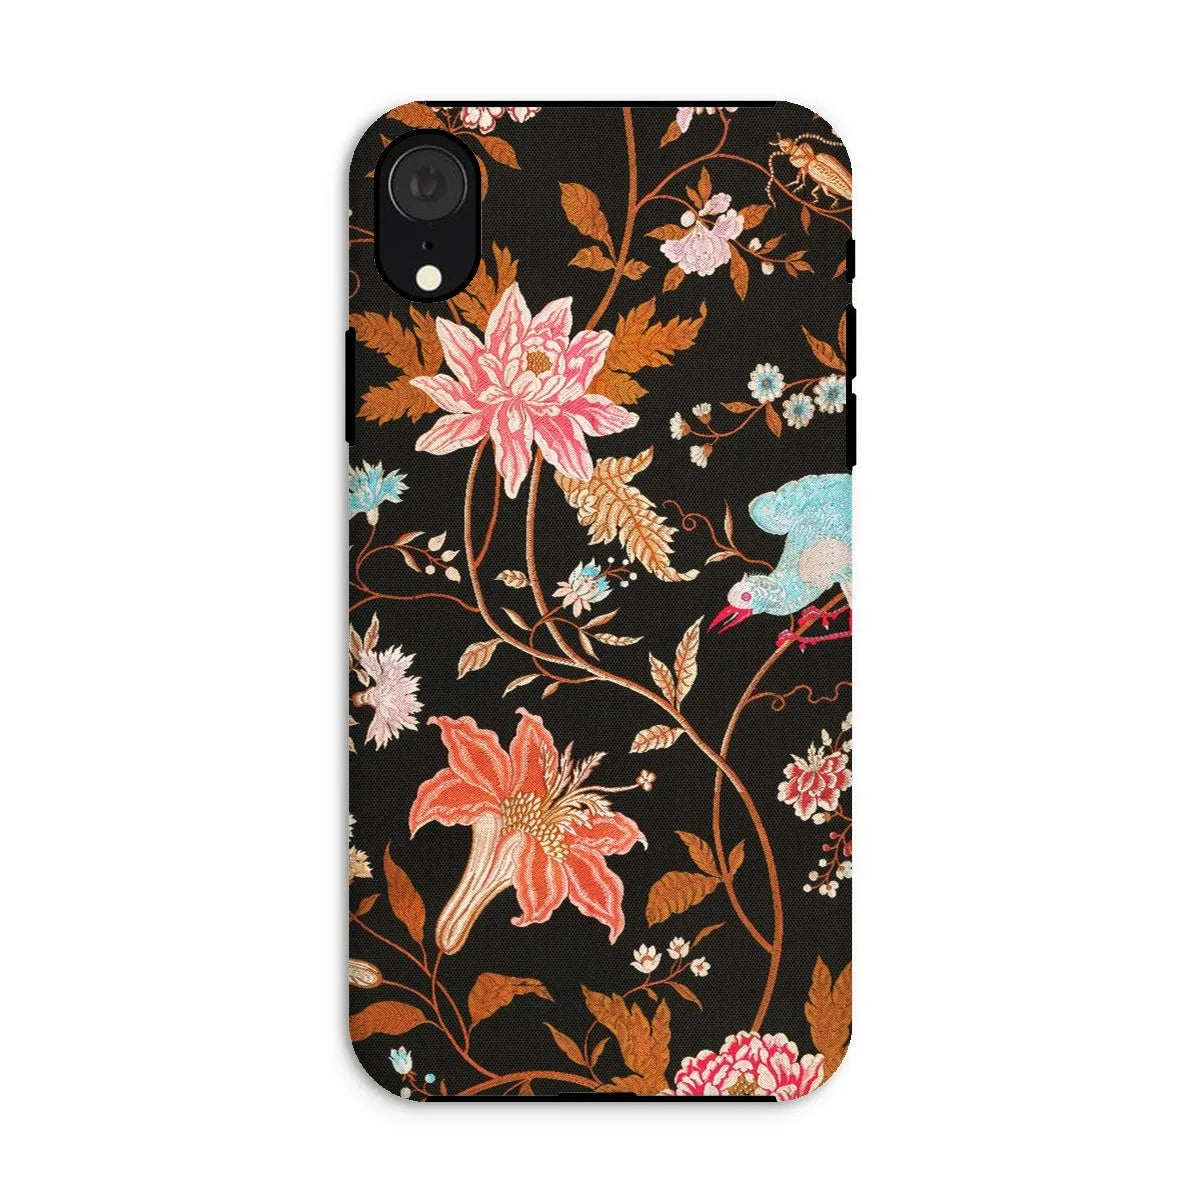 Midnight Call - Indian Aesthetic Fabric Art Phone Case - Iphone Xr / Matte - Mobile Phone Cases - Aesthetic Art